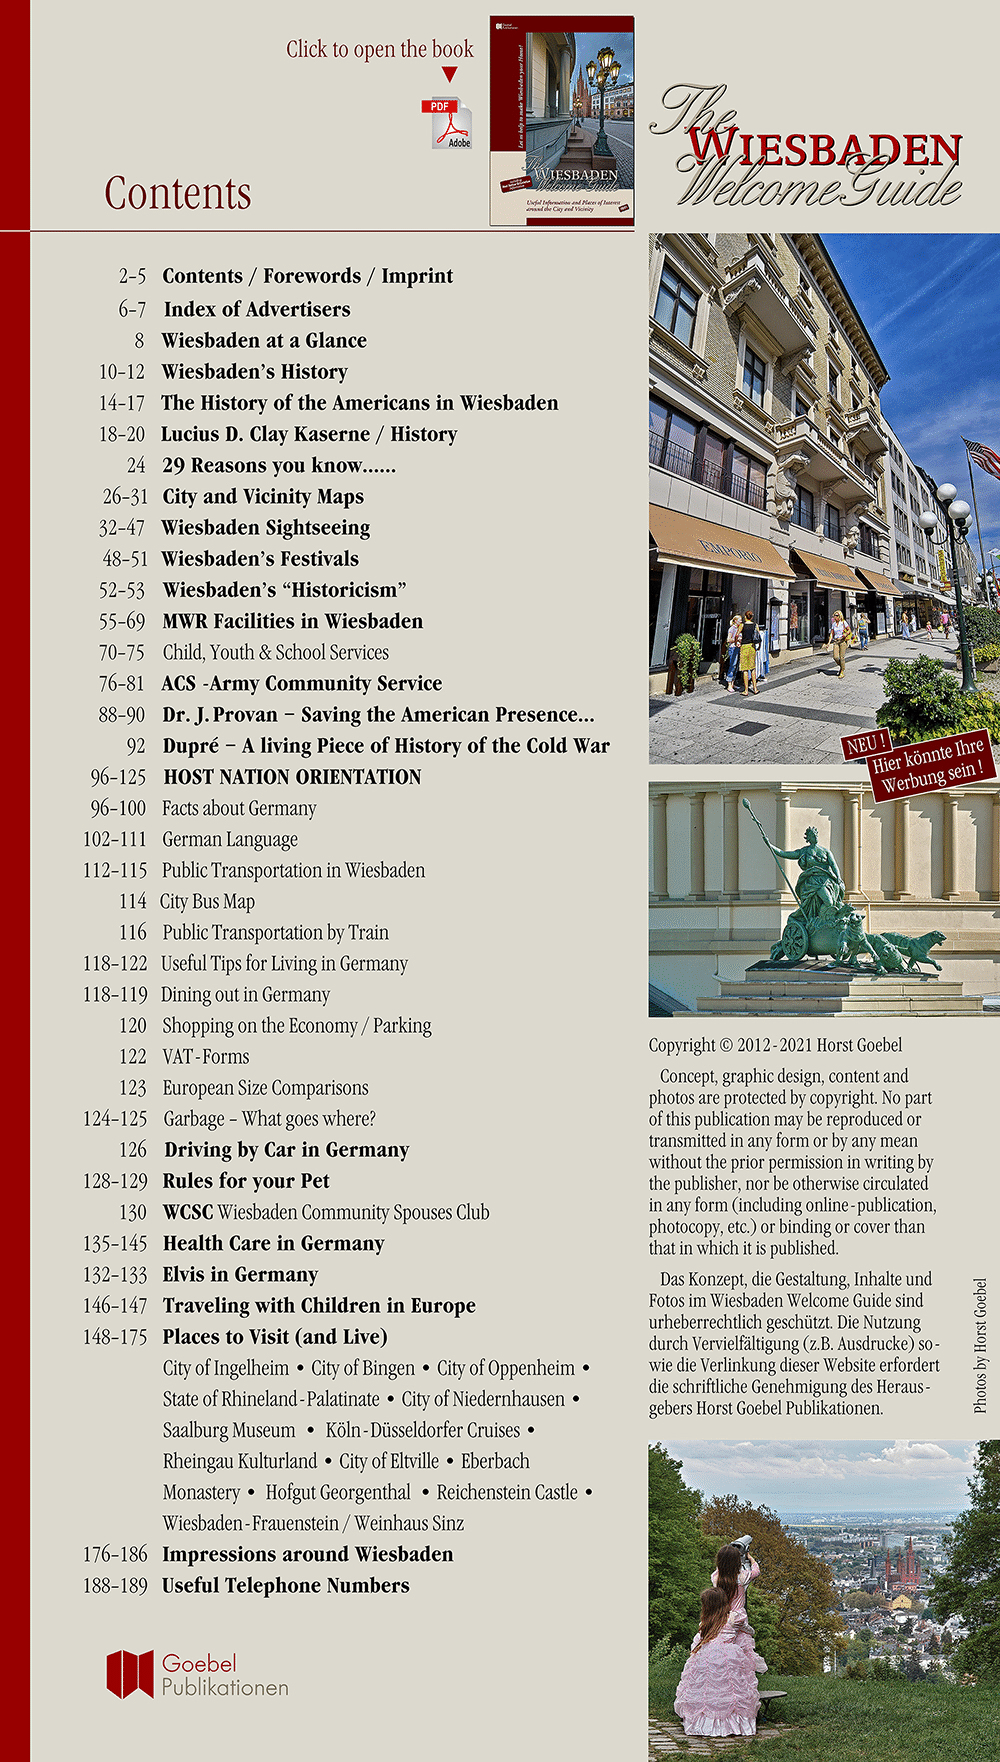 CONTENTS Liste 1000   wiesbaden welcome guide 